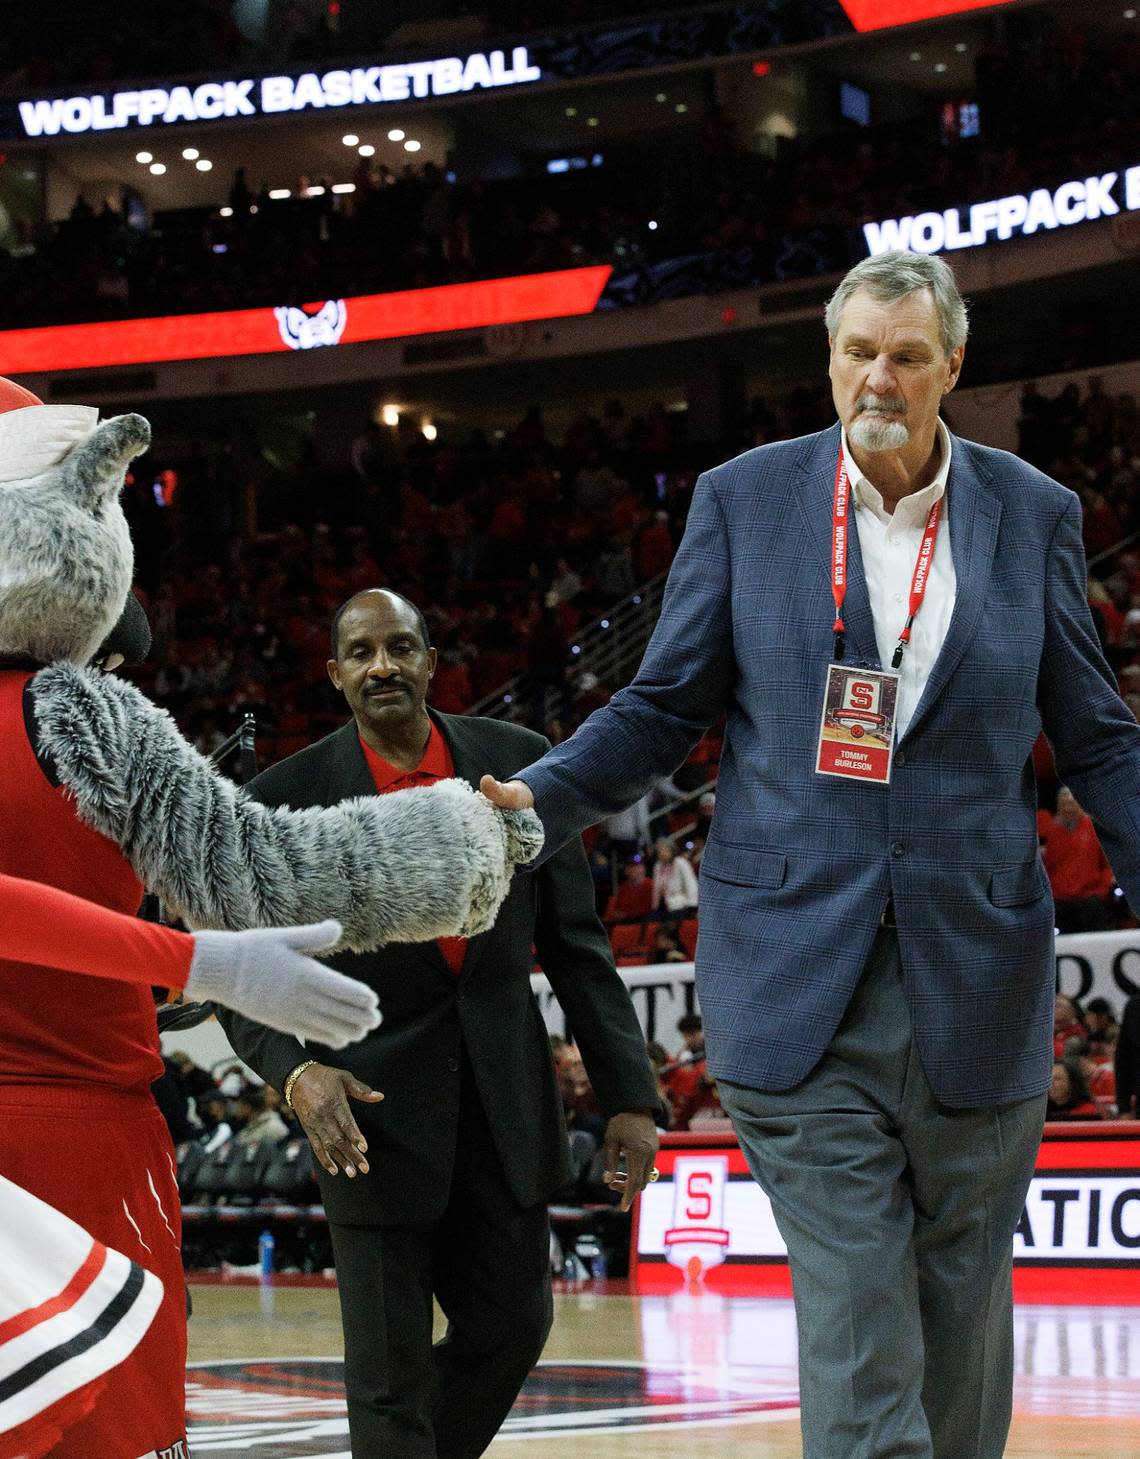 Tommy Burleson shakes hands with Mr. Wuf after members of the N.C. State men’s basketball 1974 national championship team were honored during a halftime ceremony on Saturday, Feb. 24, 2024, at PNC Arena in Raleigh, N.C.